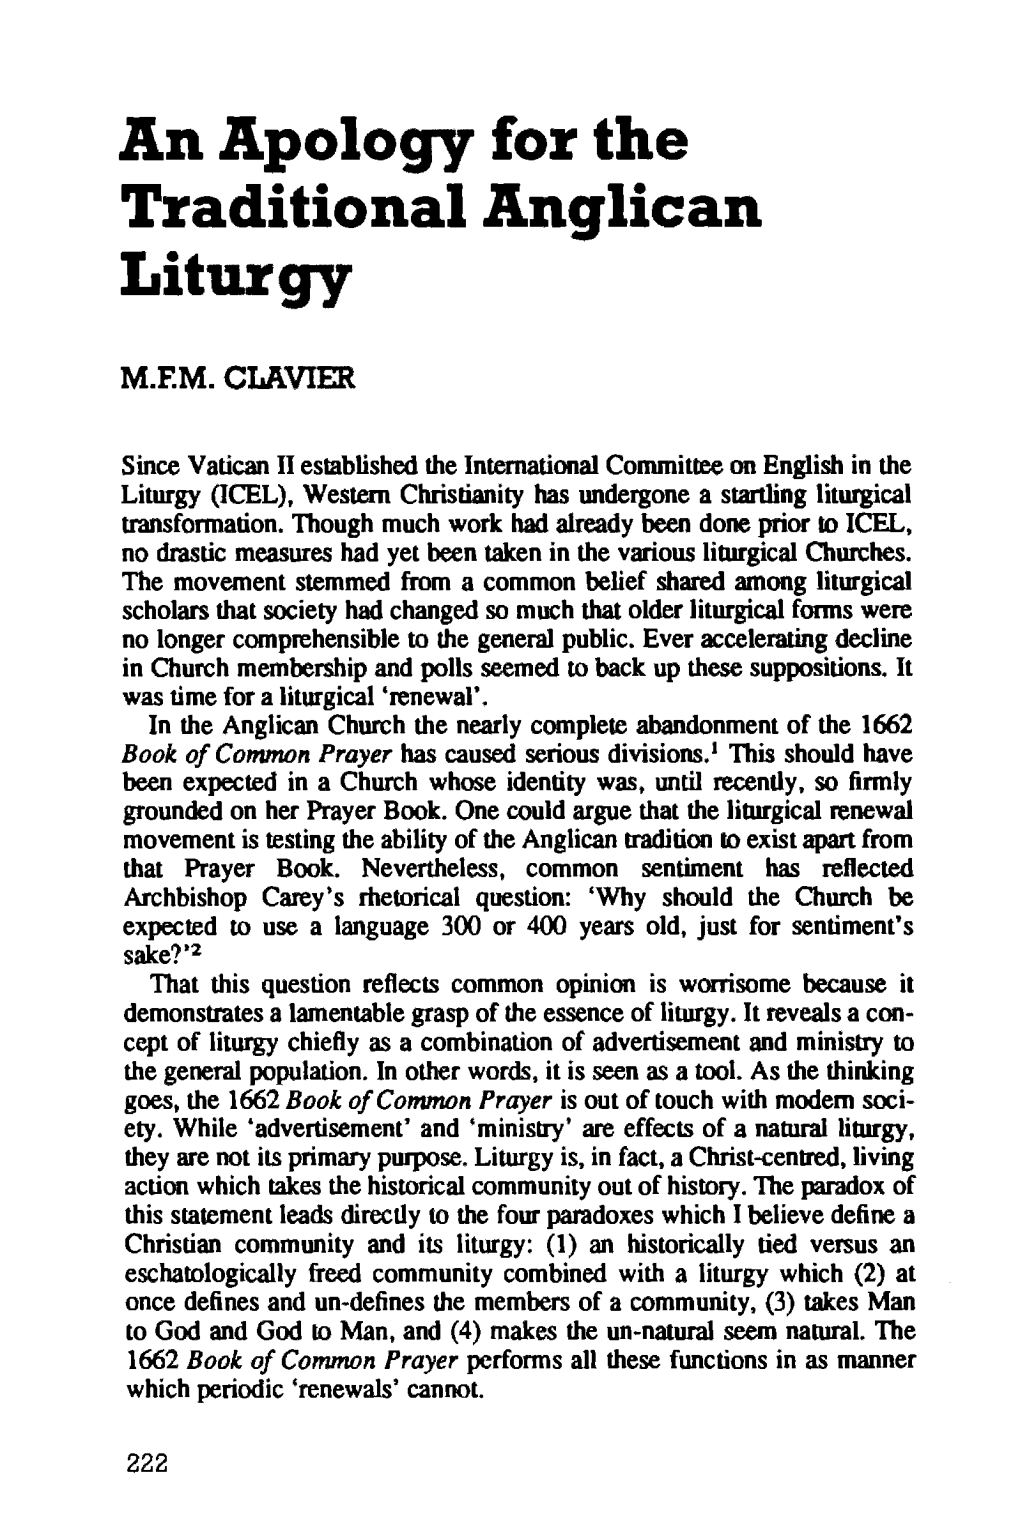 An Apology for the Traditional Anglican Liturgy